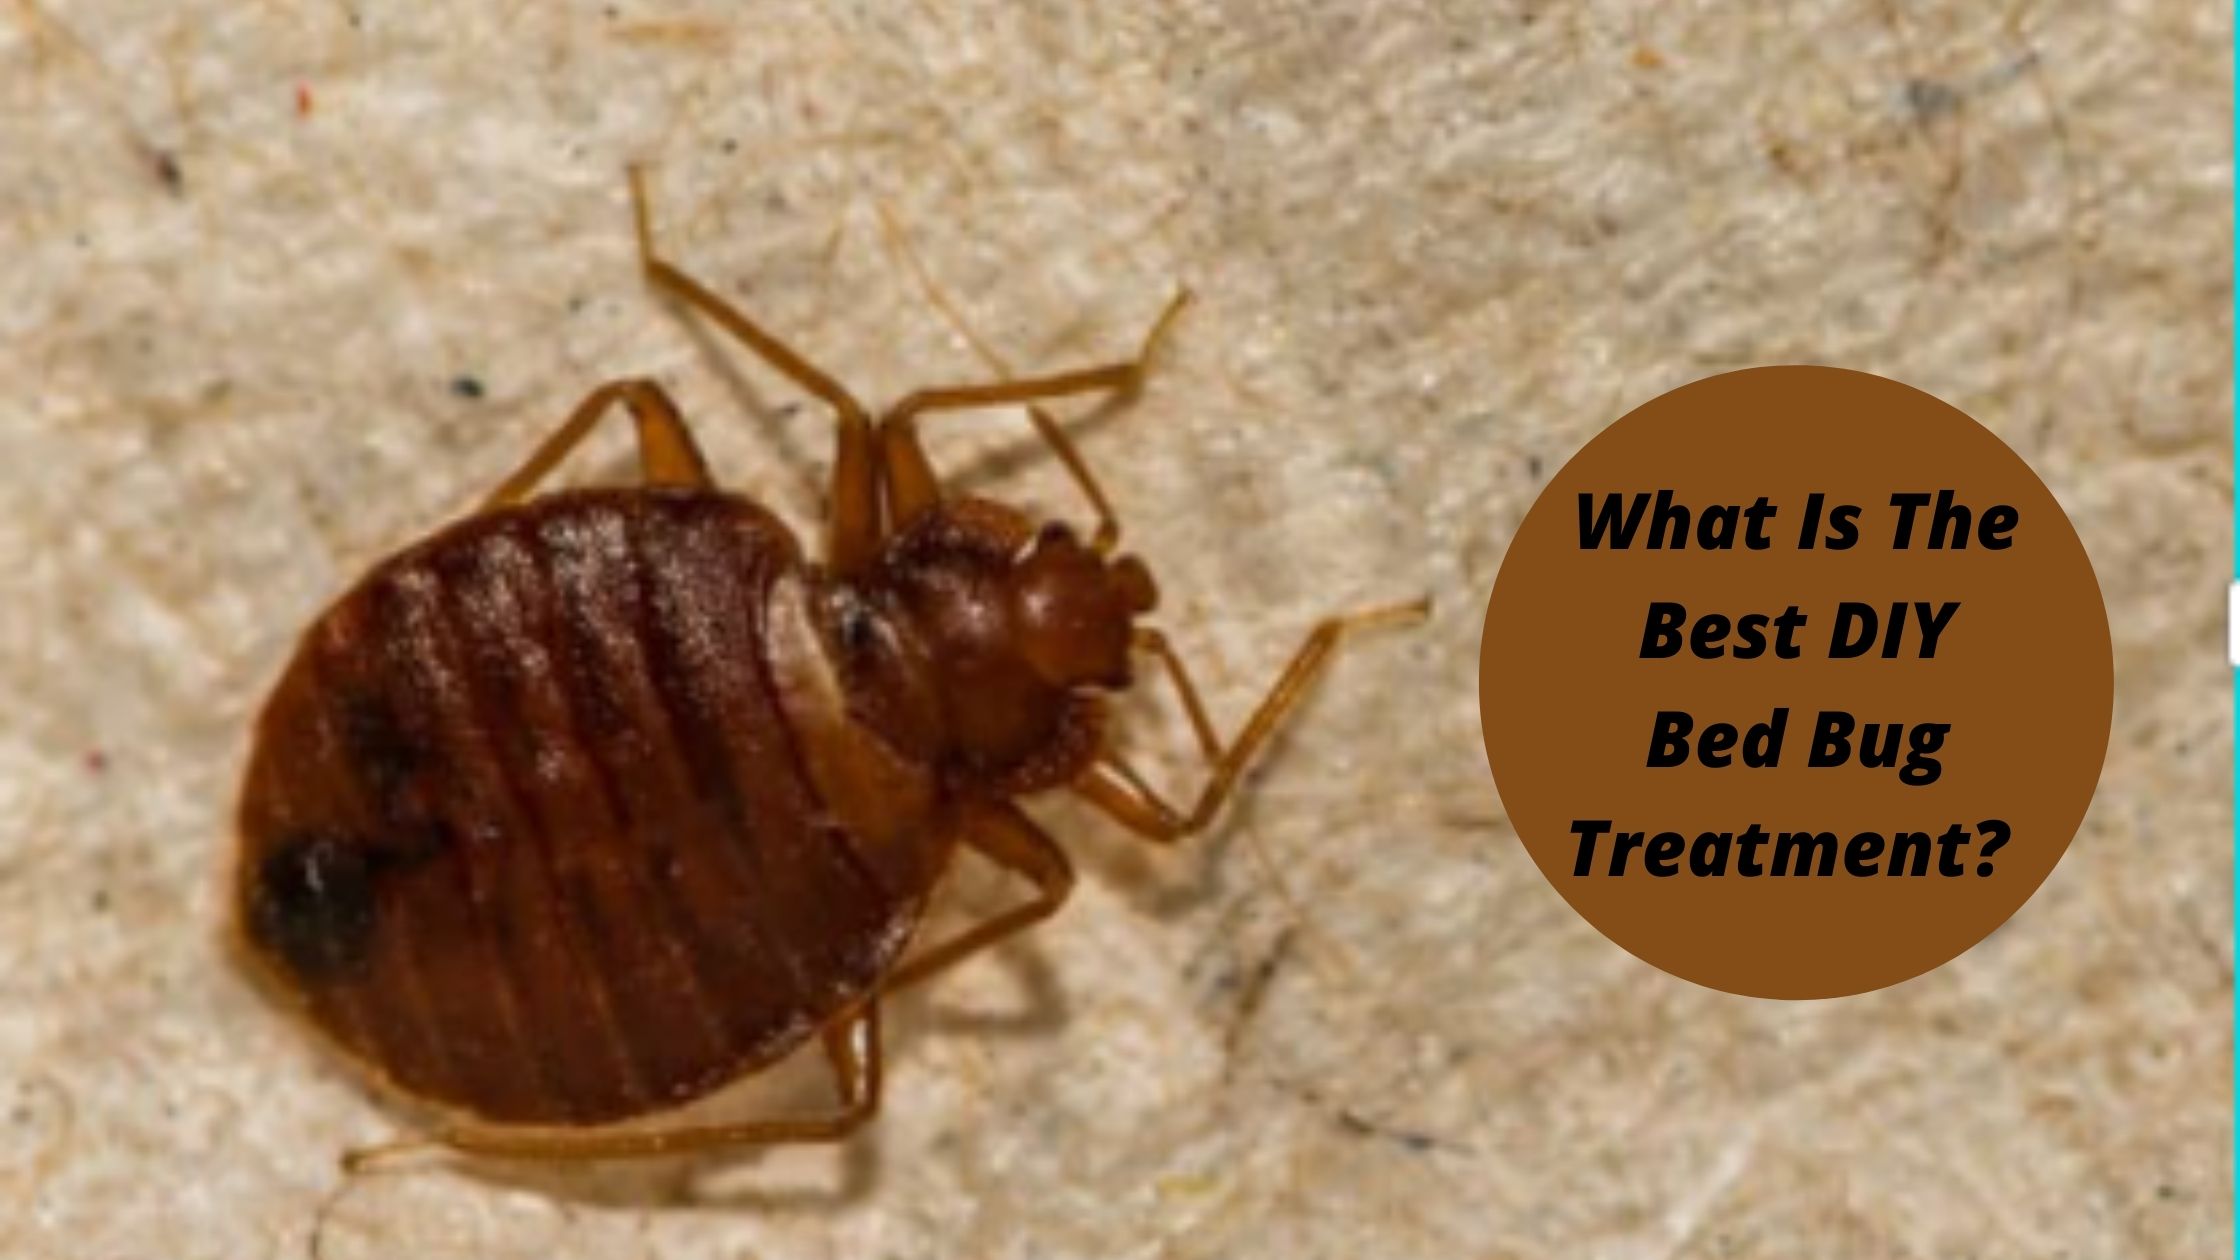 What Is The Best DIY Bed Bug Treatment?